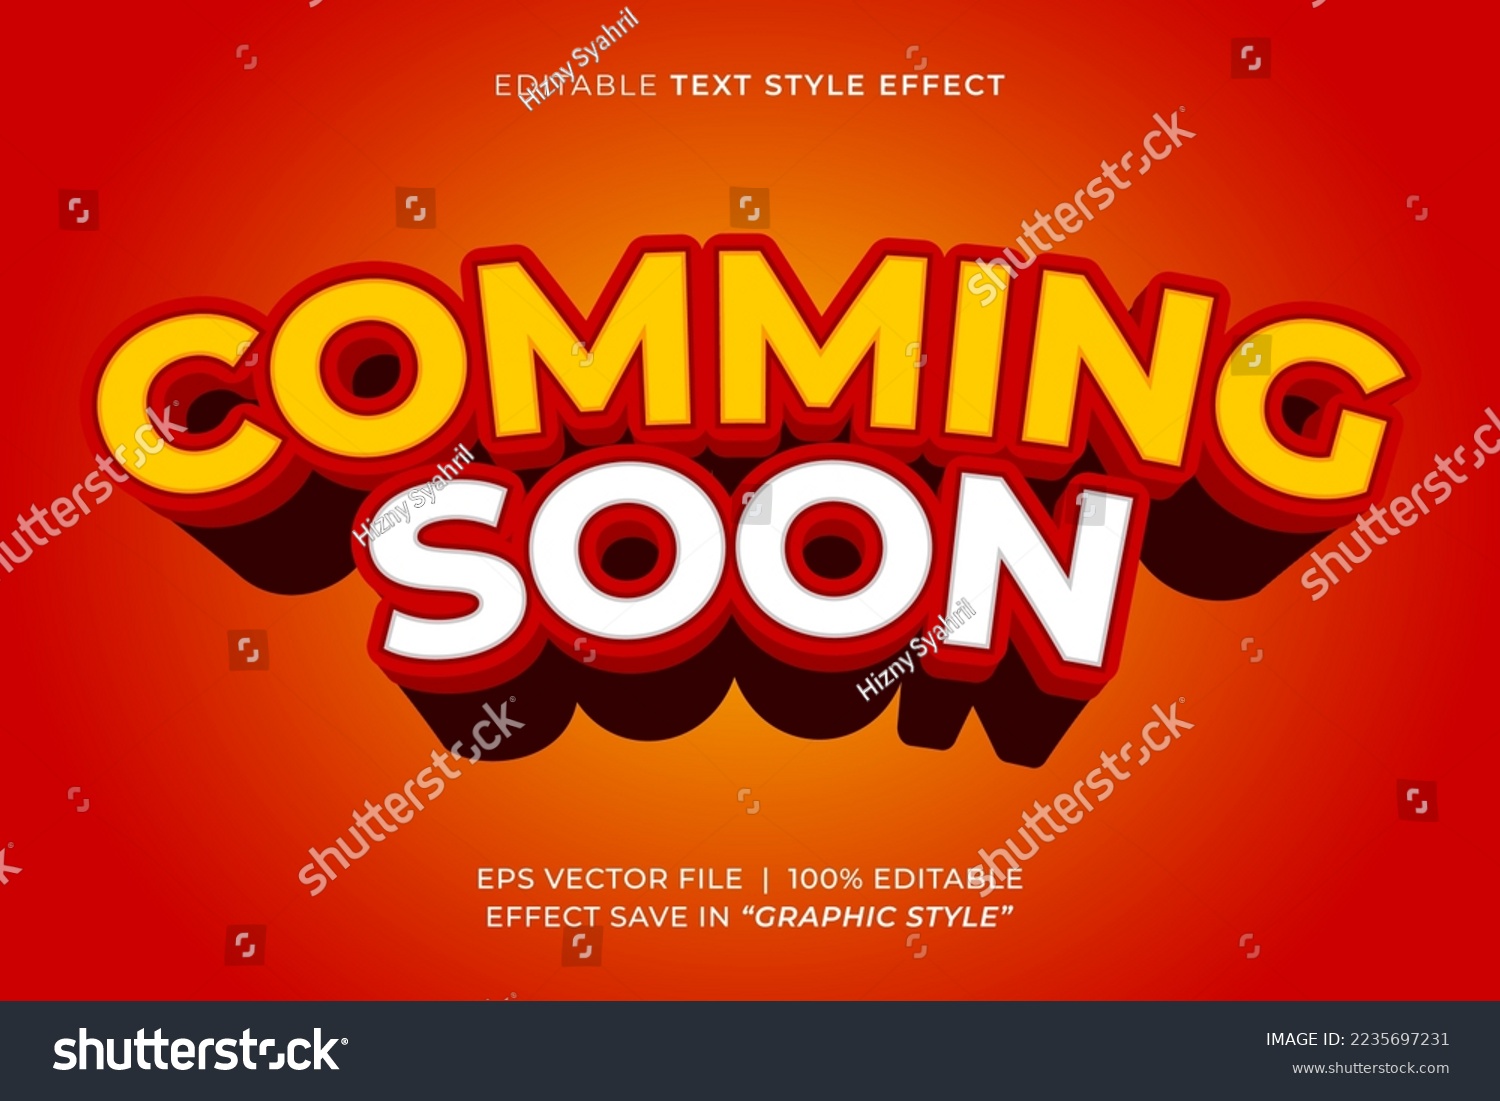 Comming soon 3d editable text effect template #2235697231